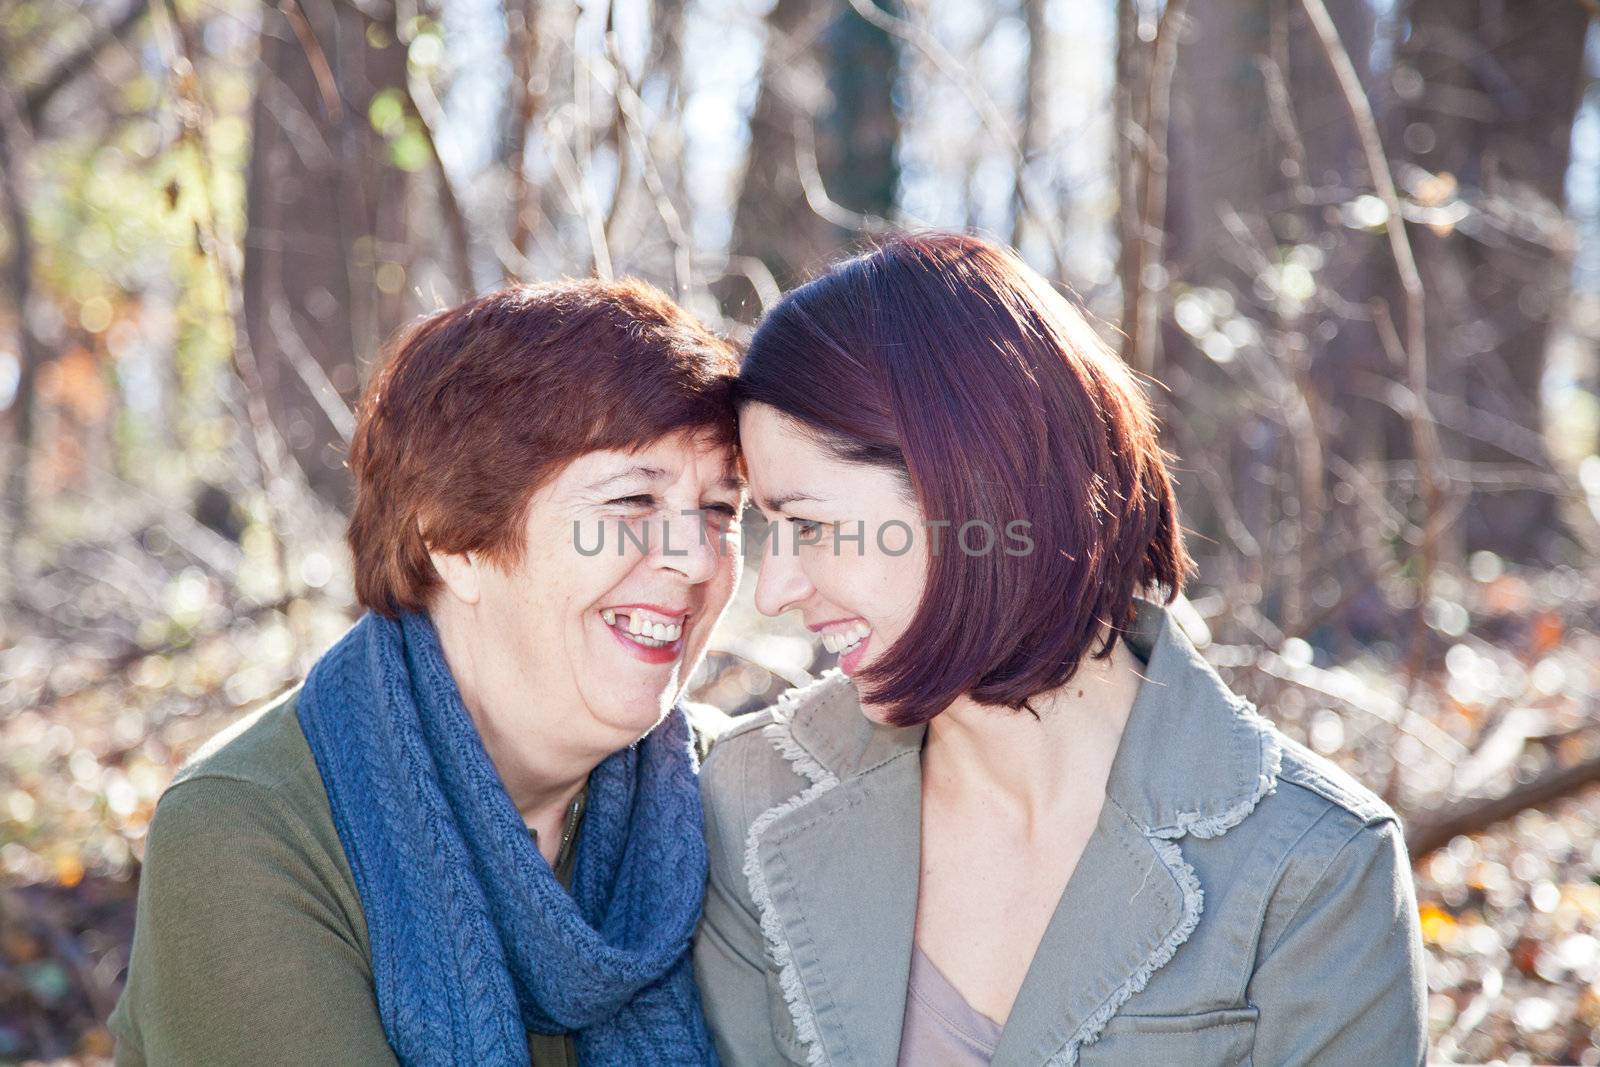 Intimate portrait of women (mother and daughter) laughing at each other with love and affection.